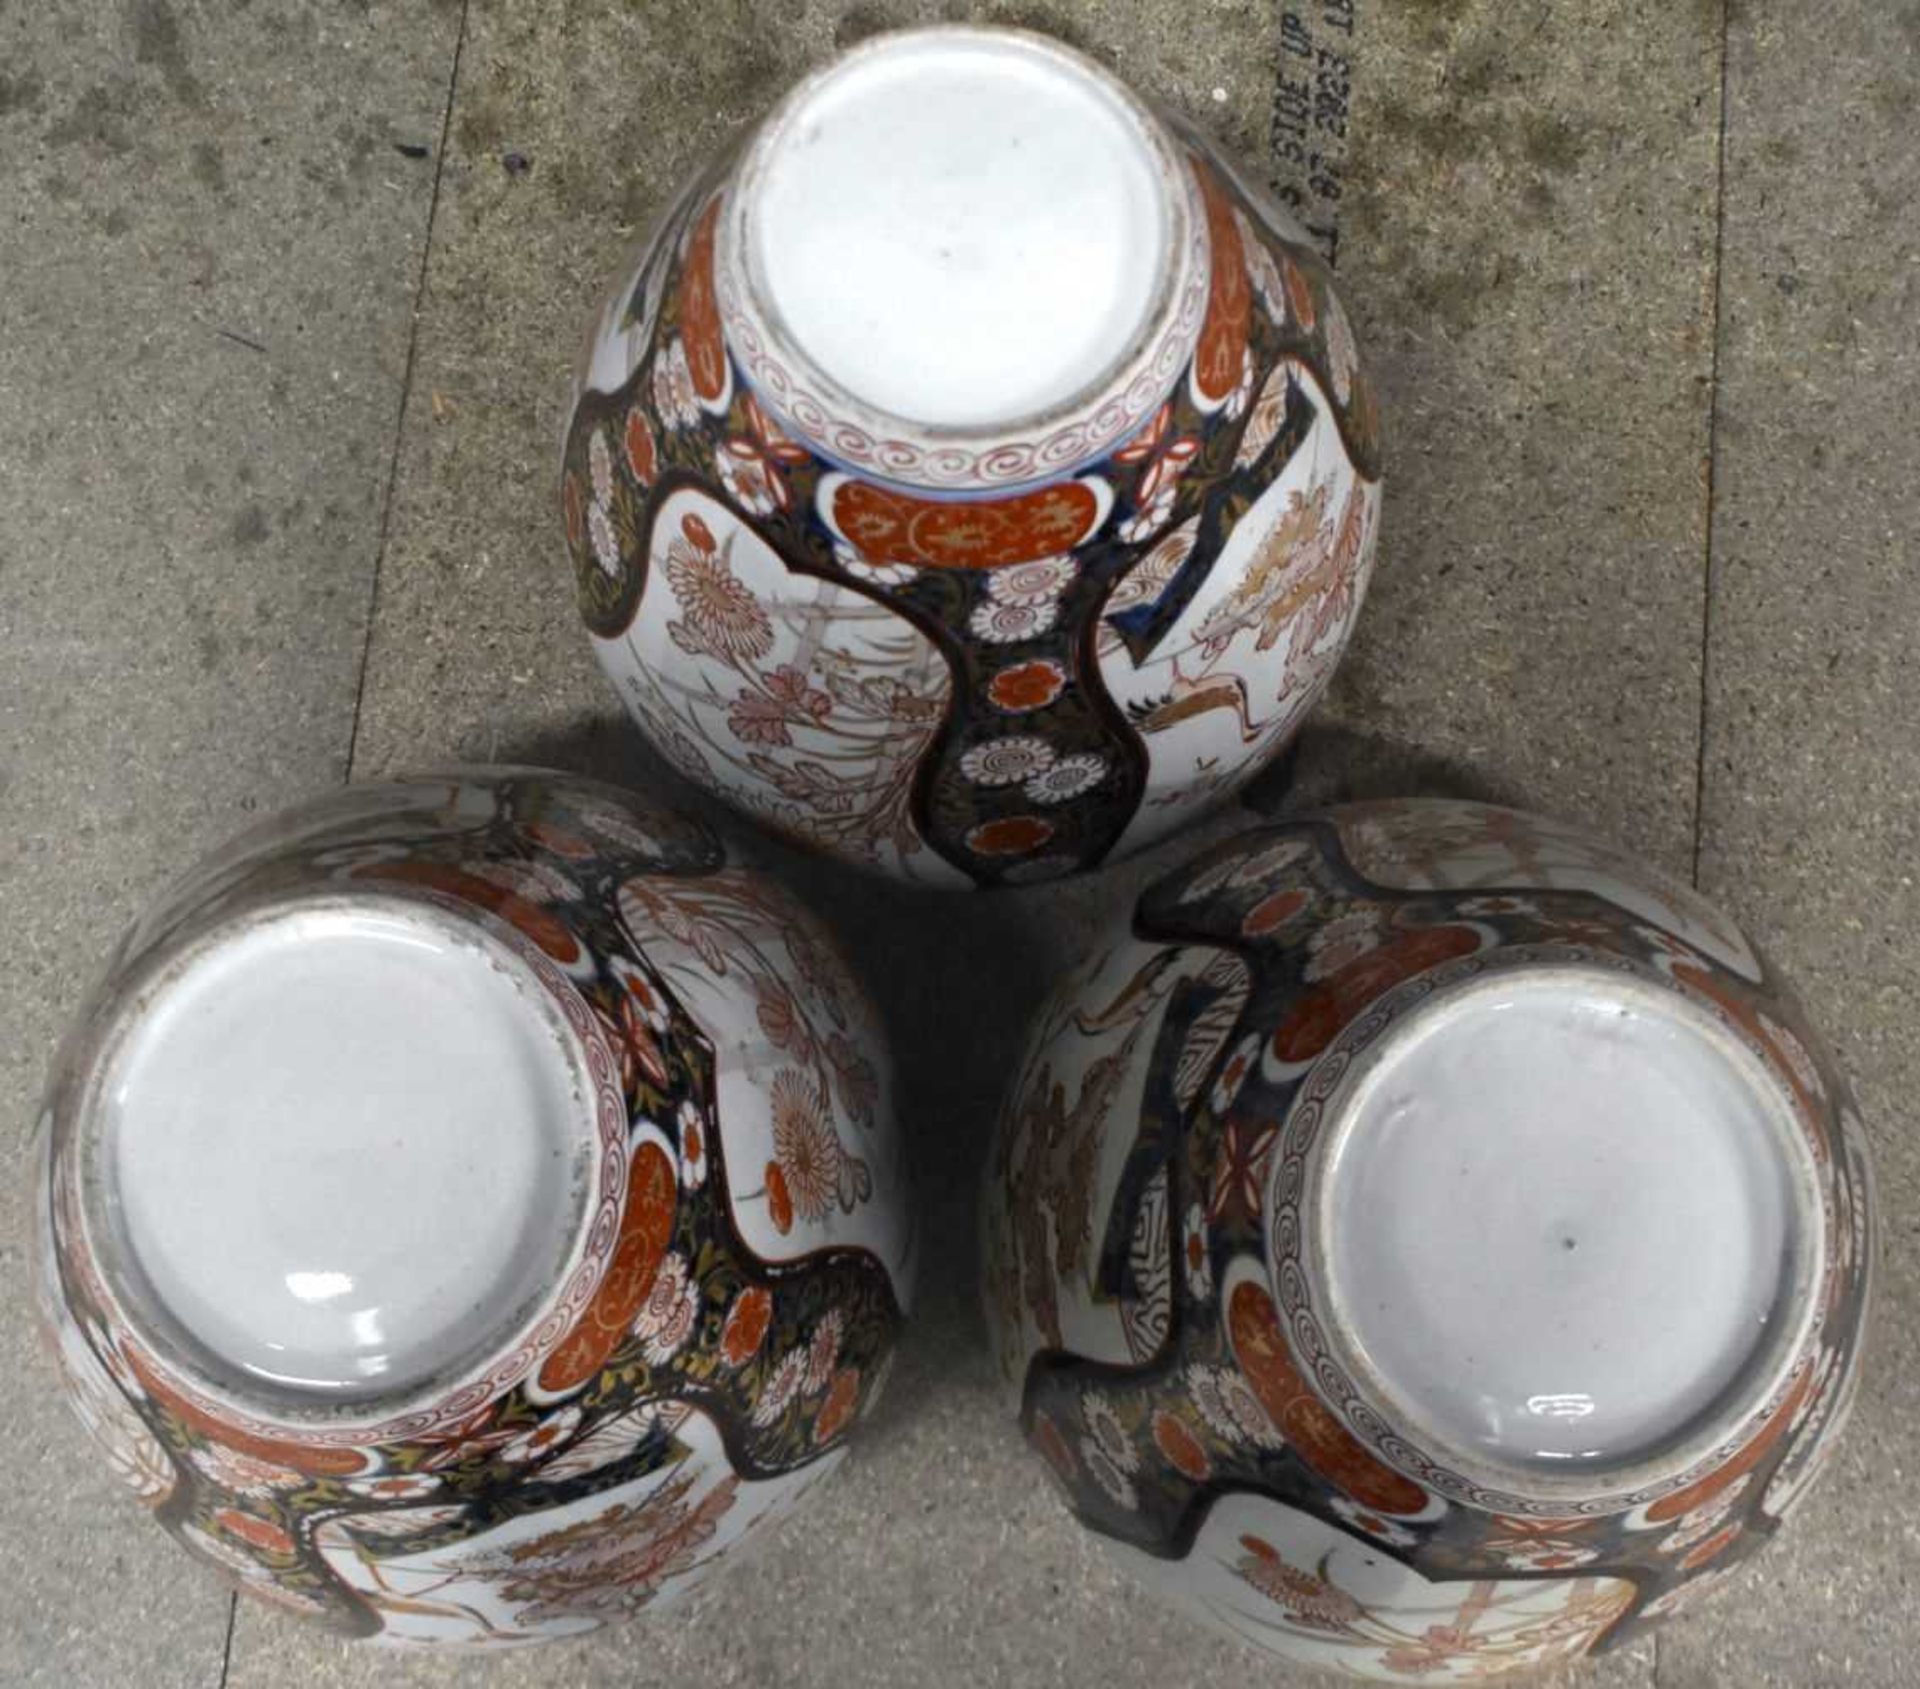 A FINE SET OF VERY LARGE 18TH CENTURY JAPANESE EDO PERIOD IMARI VASES AND COVERS painted with panels - Image 18 of 22